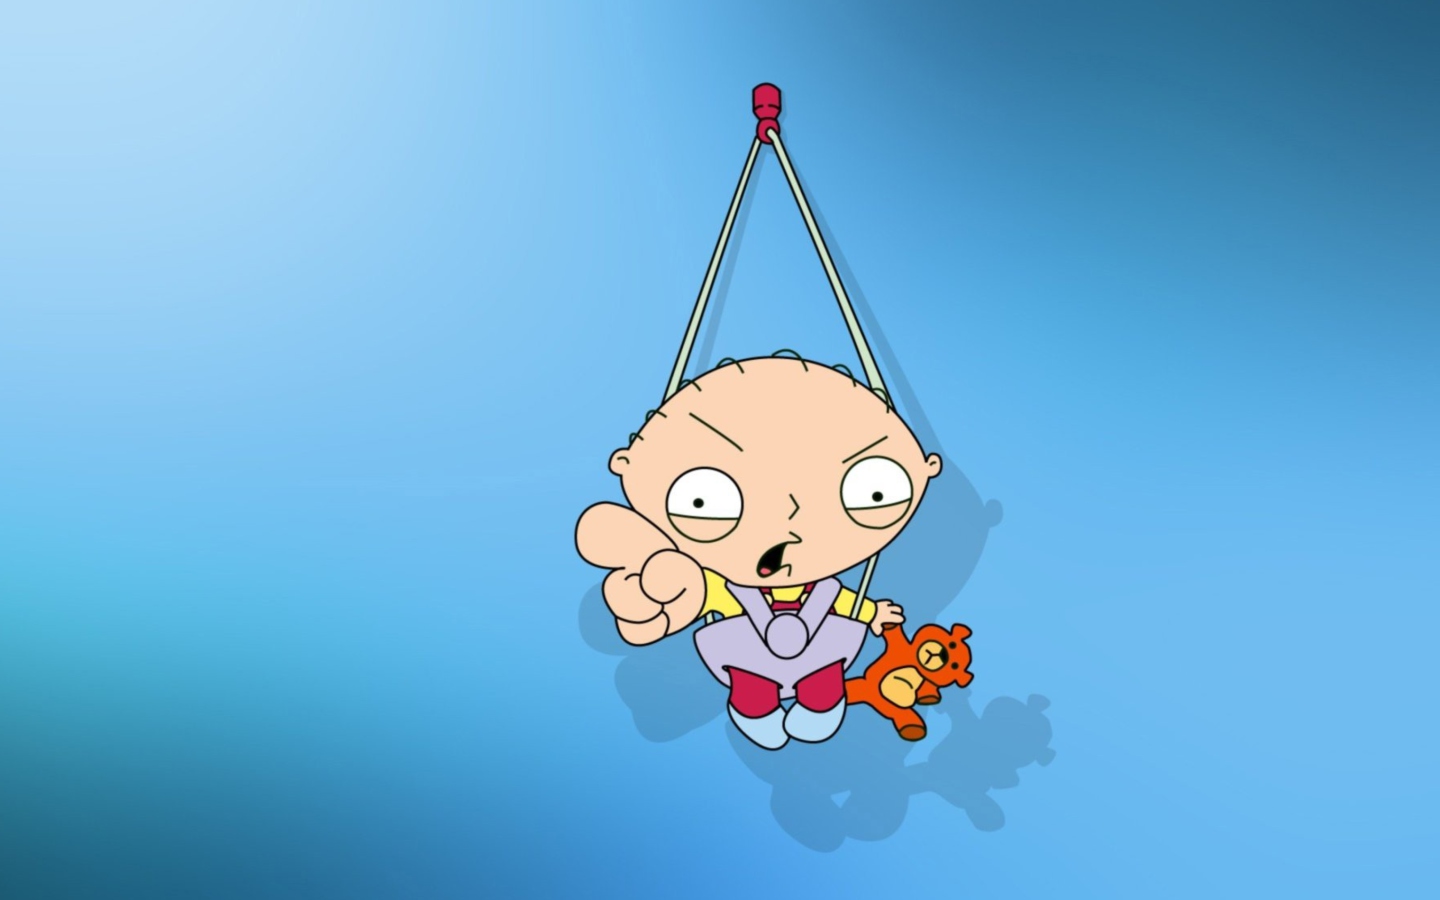 Funny Stewie From Family Guy wallpaper 1440x900